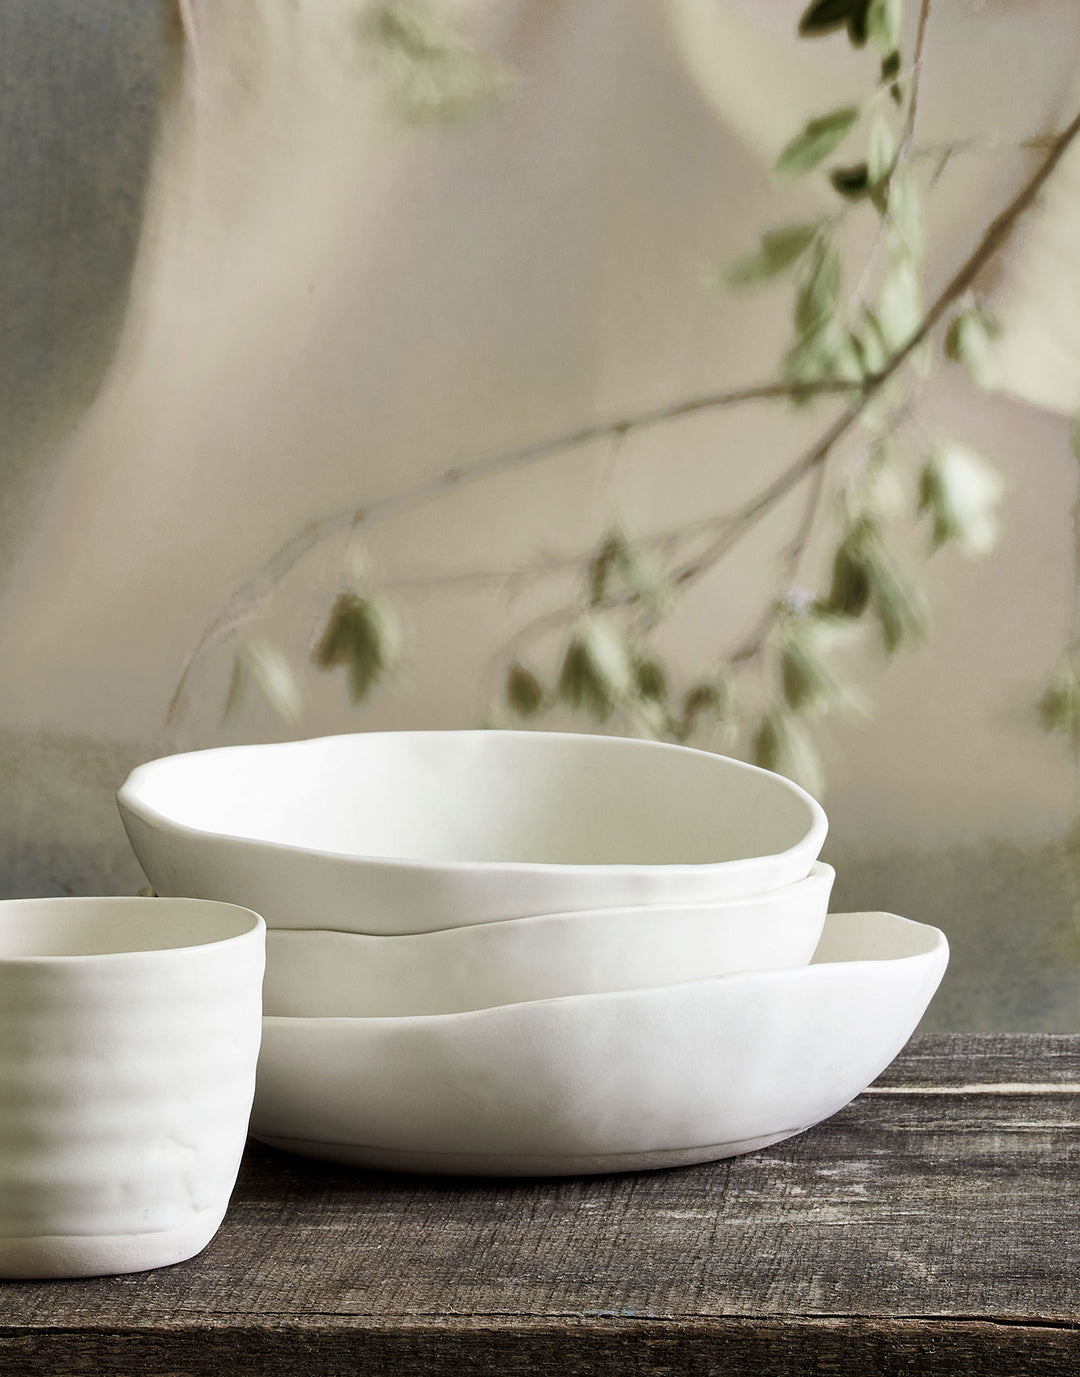 DBO HOME stack of handmade porcelain cream colored Bare Noodle Bowls and Bare Everything Bowl with artisan ceramic tumbler on natural wood table with softs linens and plant branches in the background